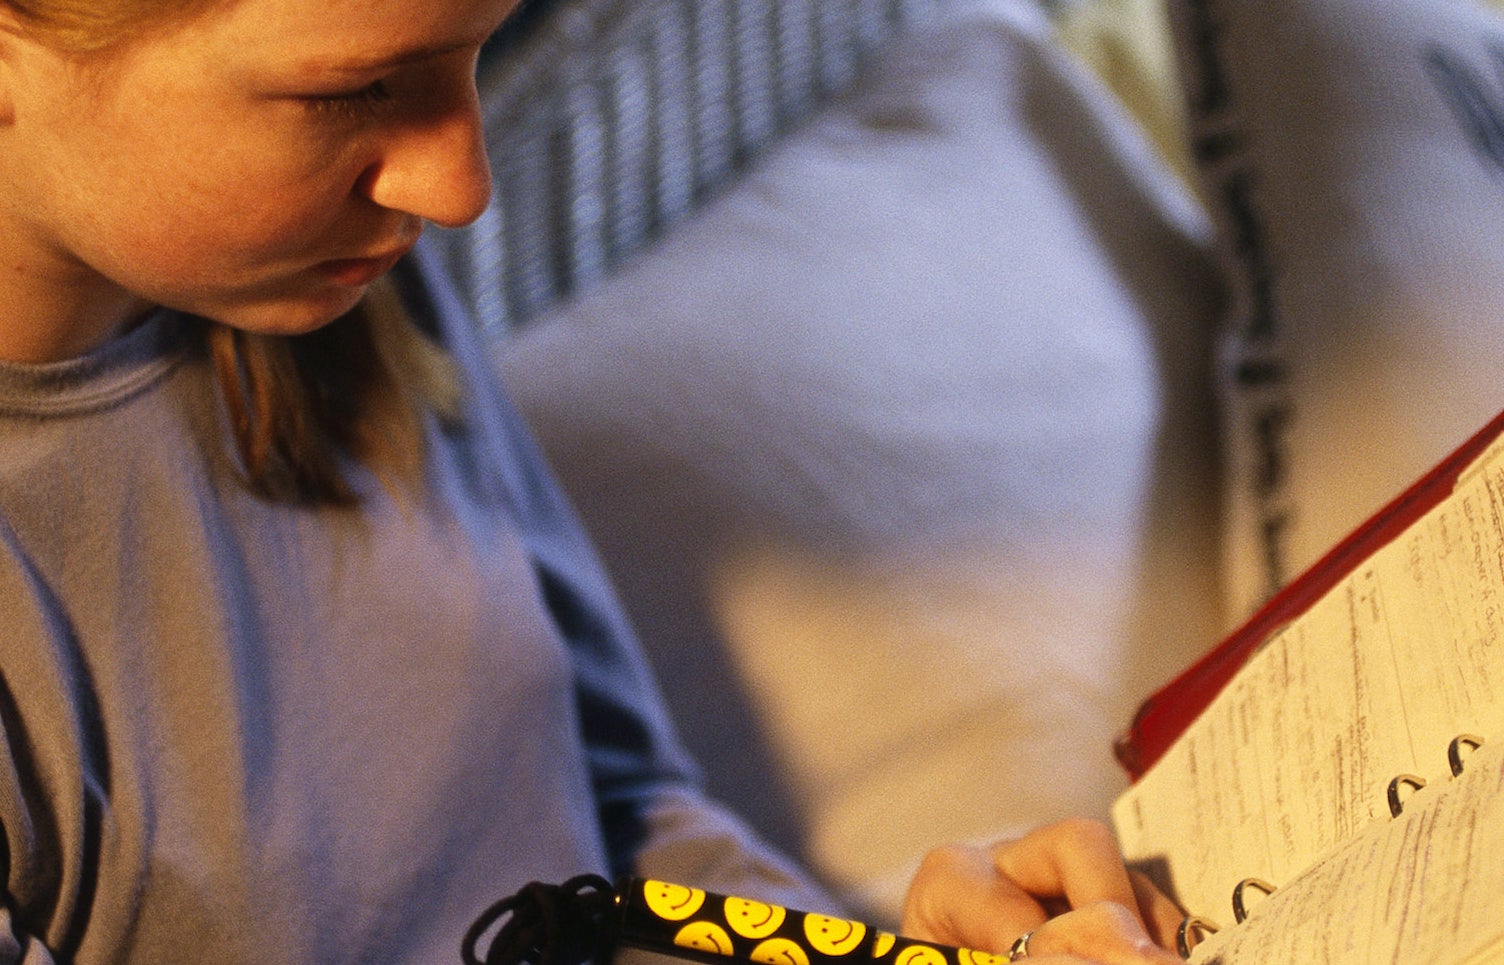 A close-up of a teen age girl writing into her red day planner with a smiley face pen